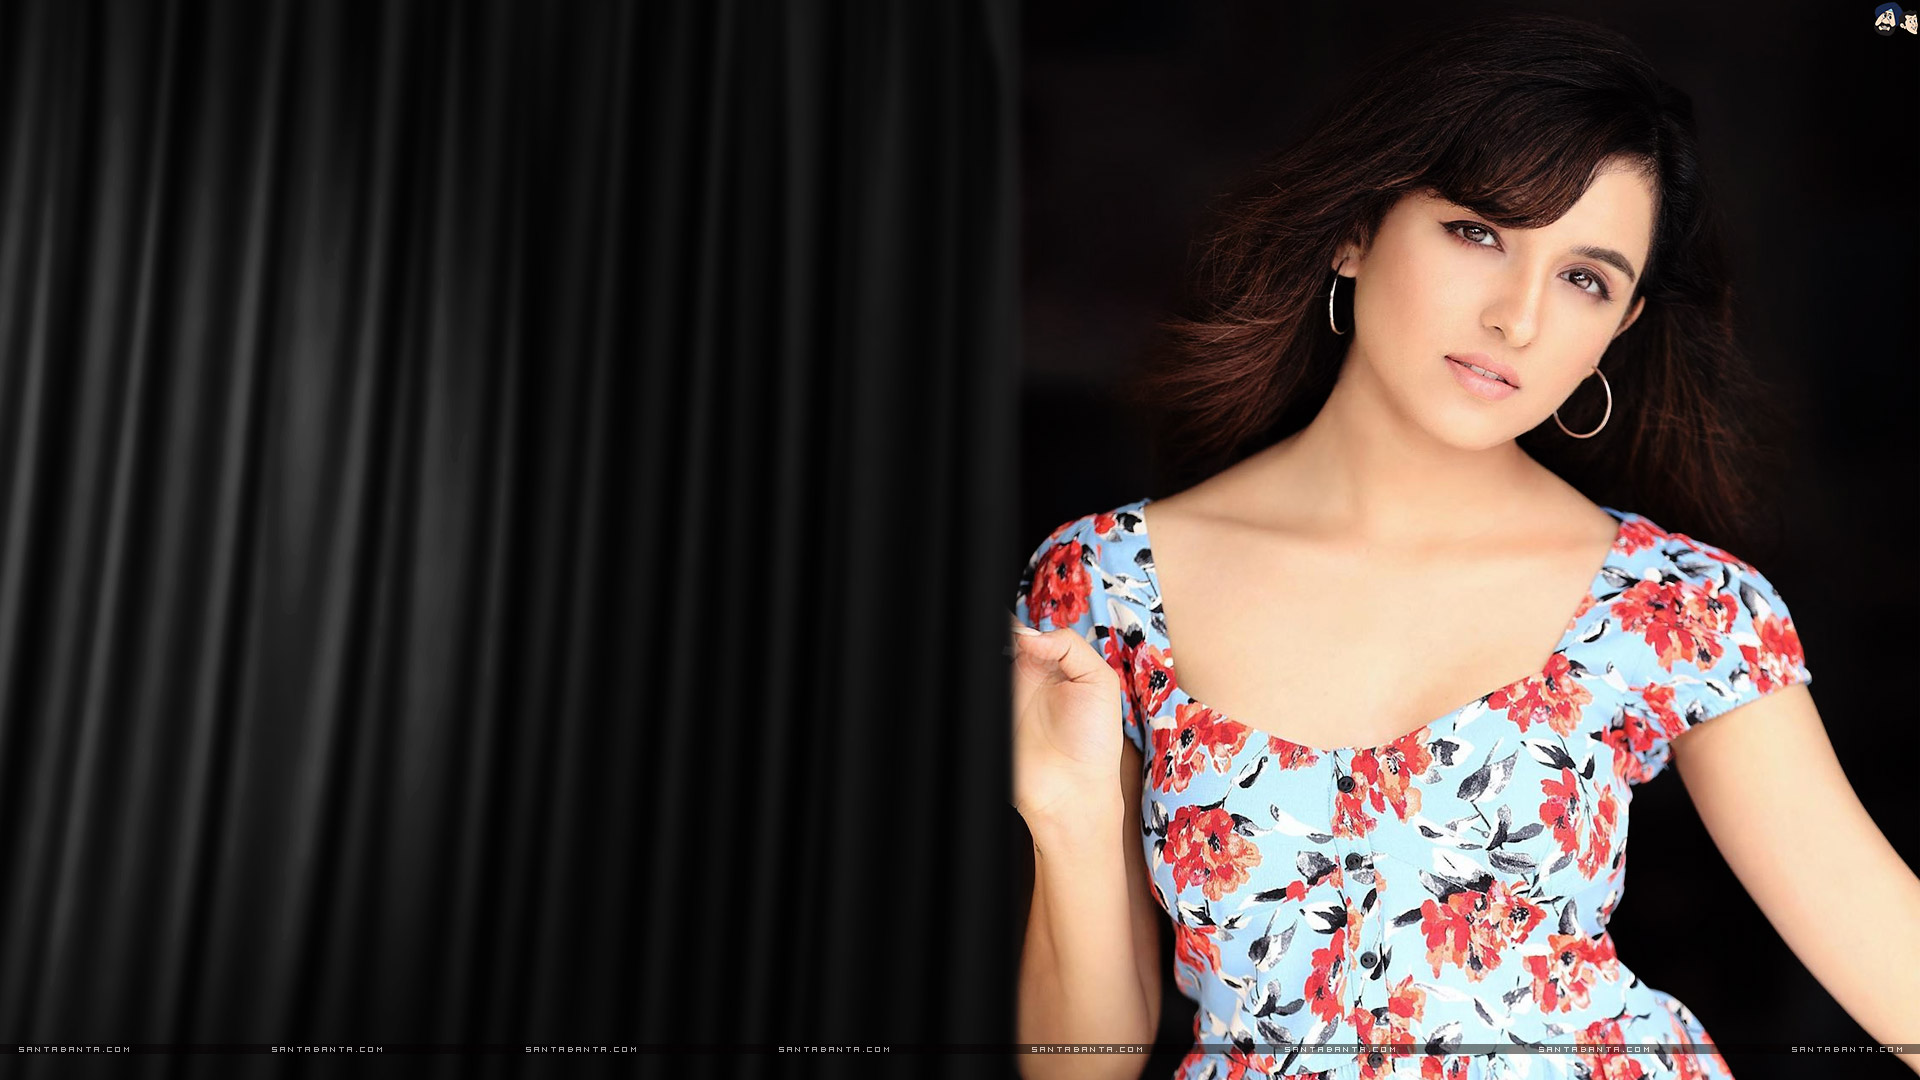 Stunning Just Like Her Voice, Singer Shirley Setia - Shirley Setia , HD Wallpaper & Backgrounds